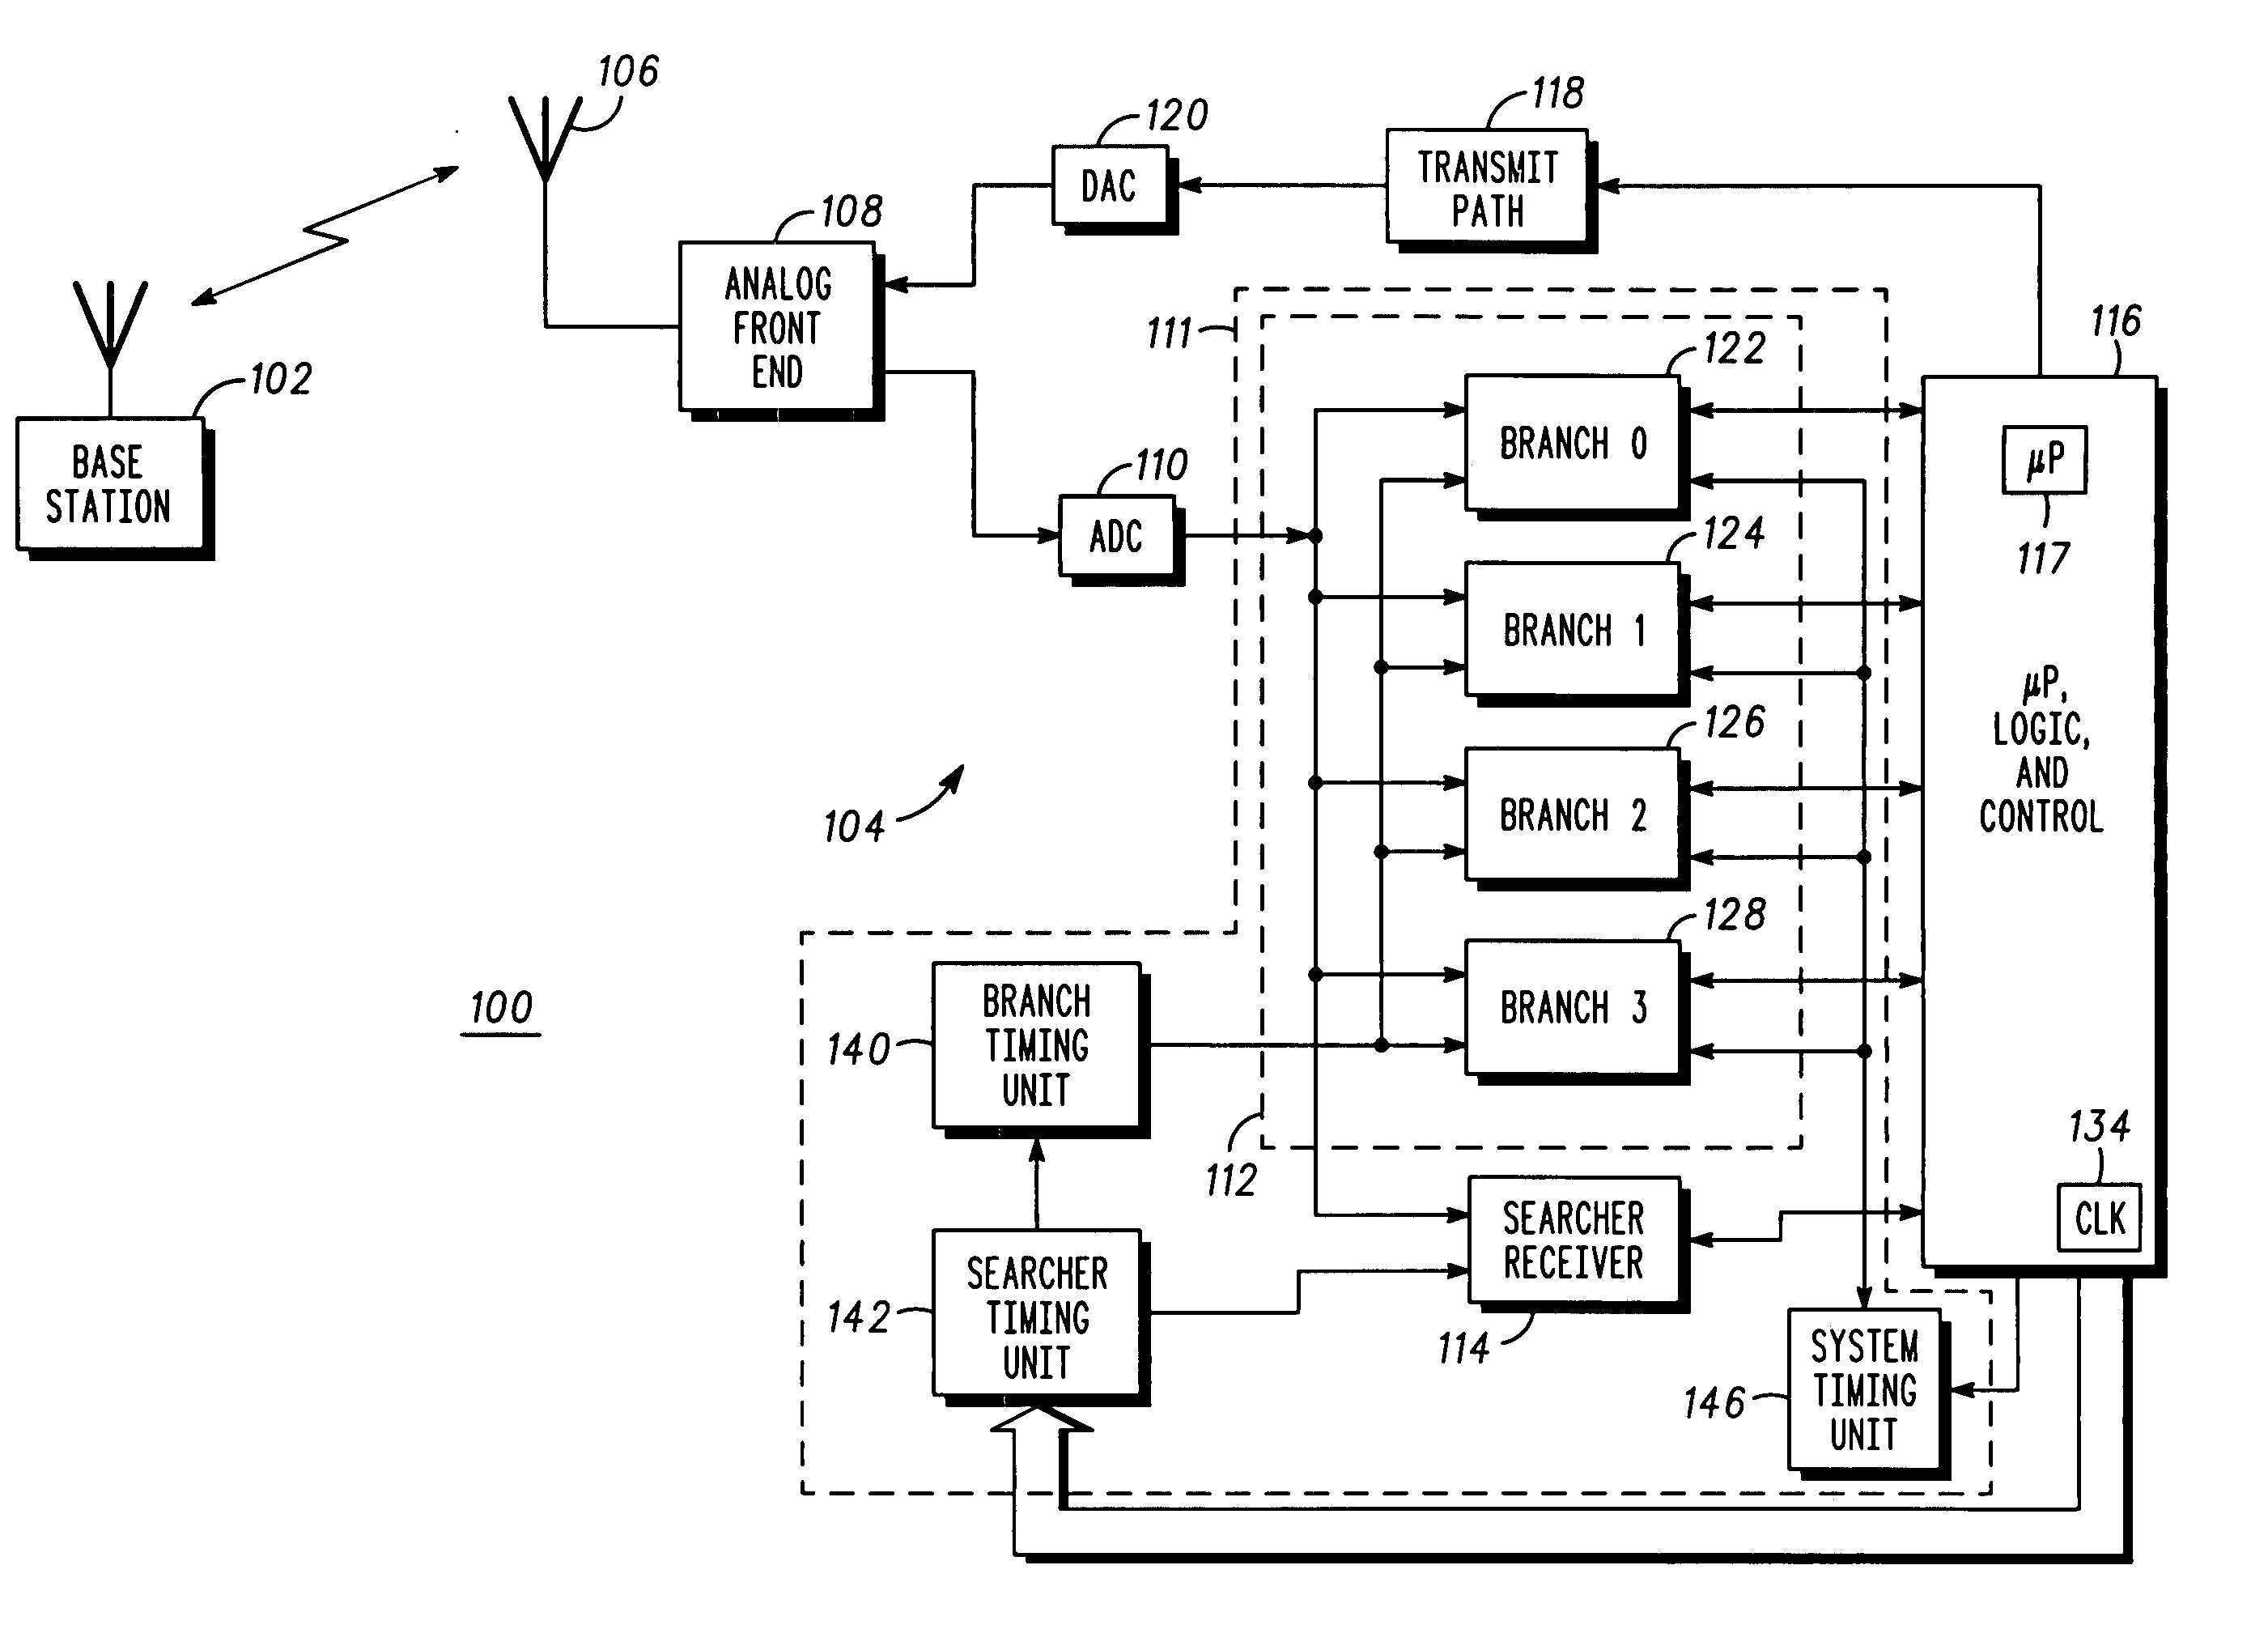 Method of and apparatus for activating a spread-spectrum radiotelephone